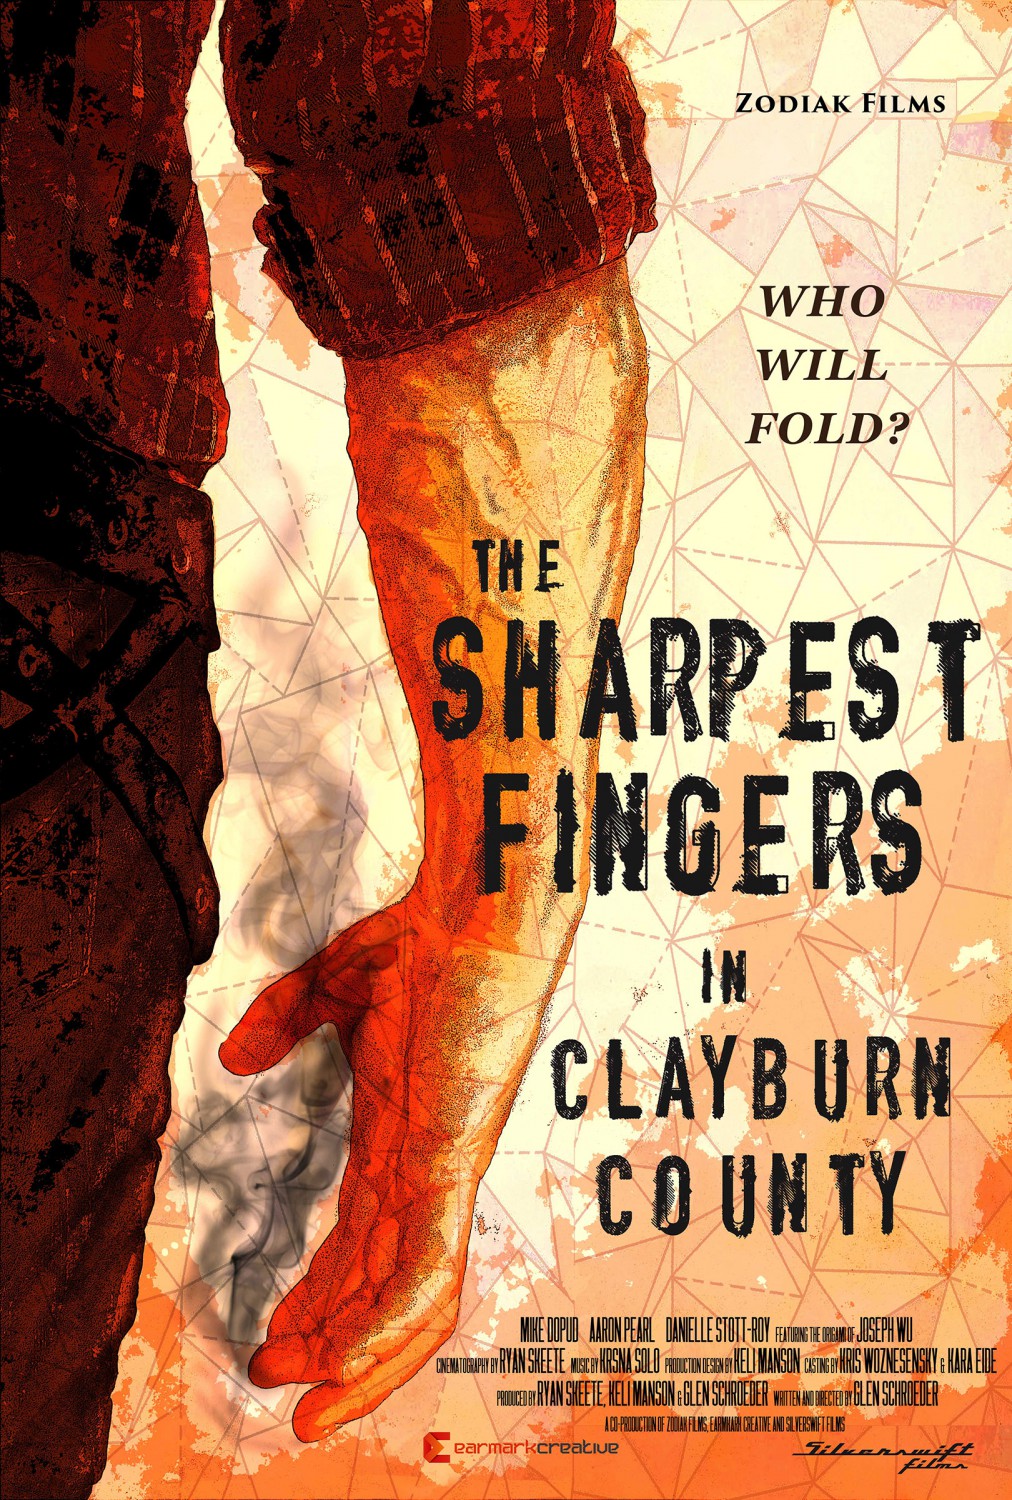 Extra Large Movie Poster Image for The Sharpest Fingers in Clayburn County